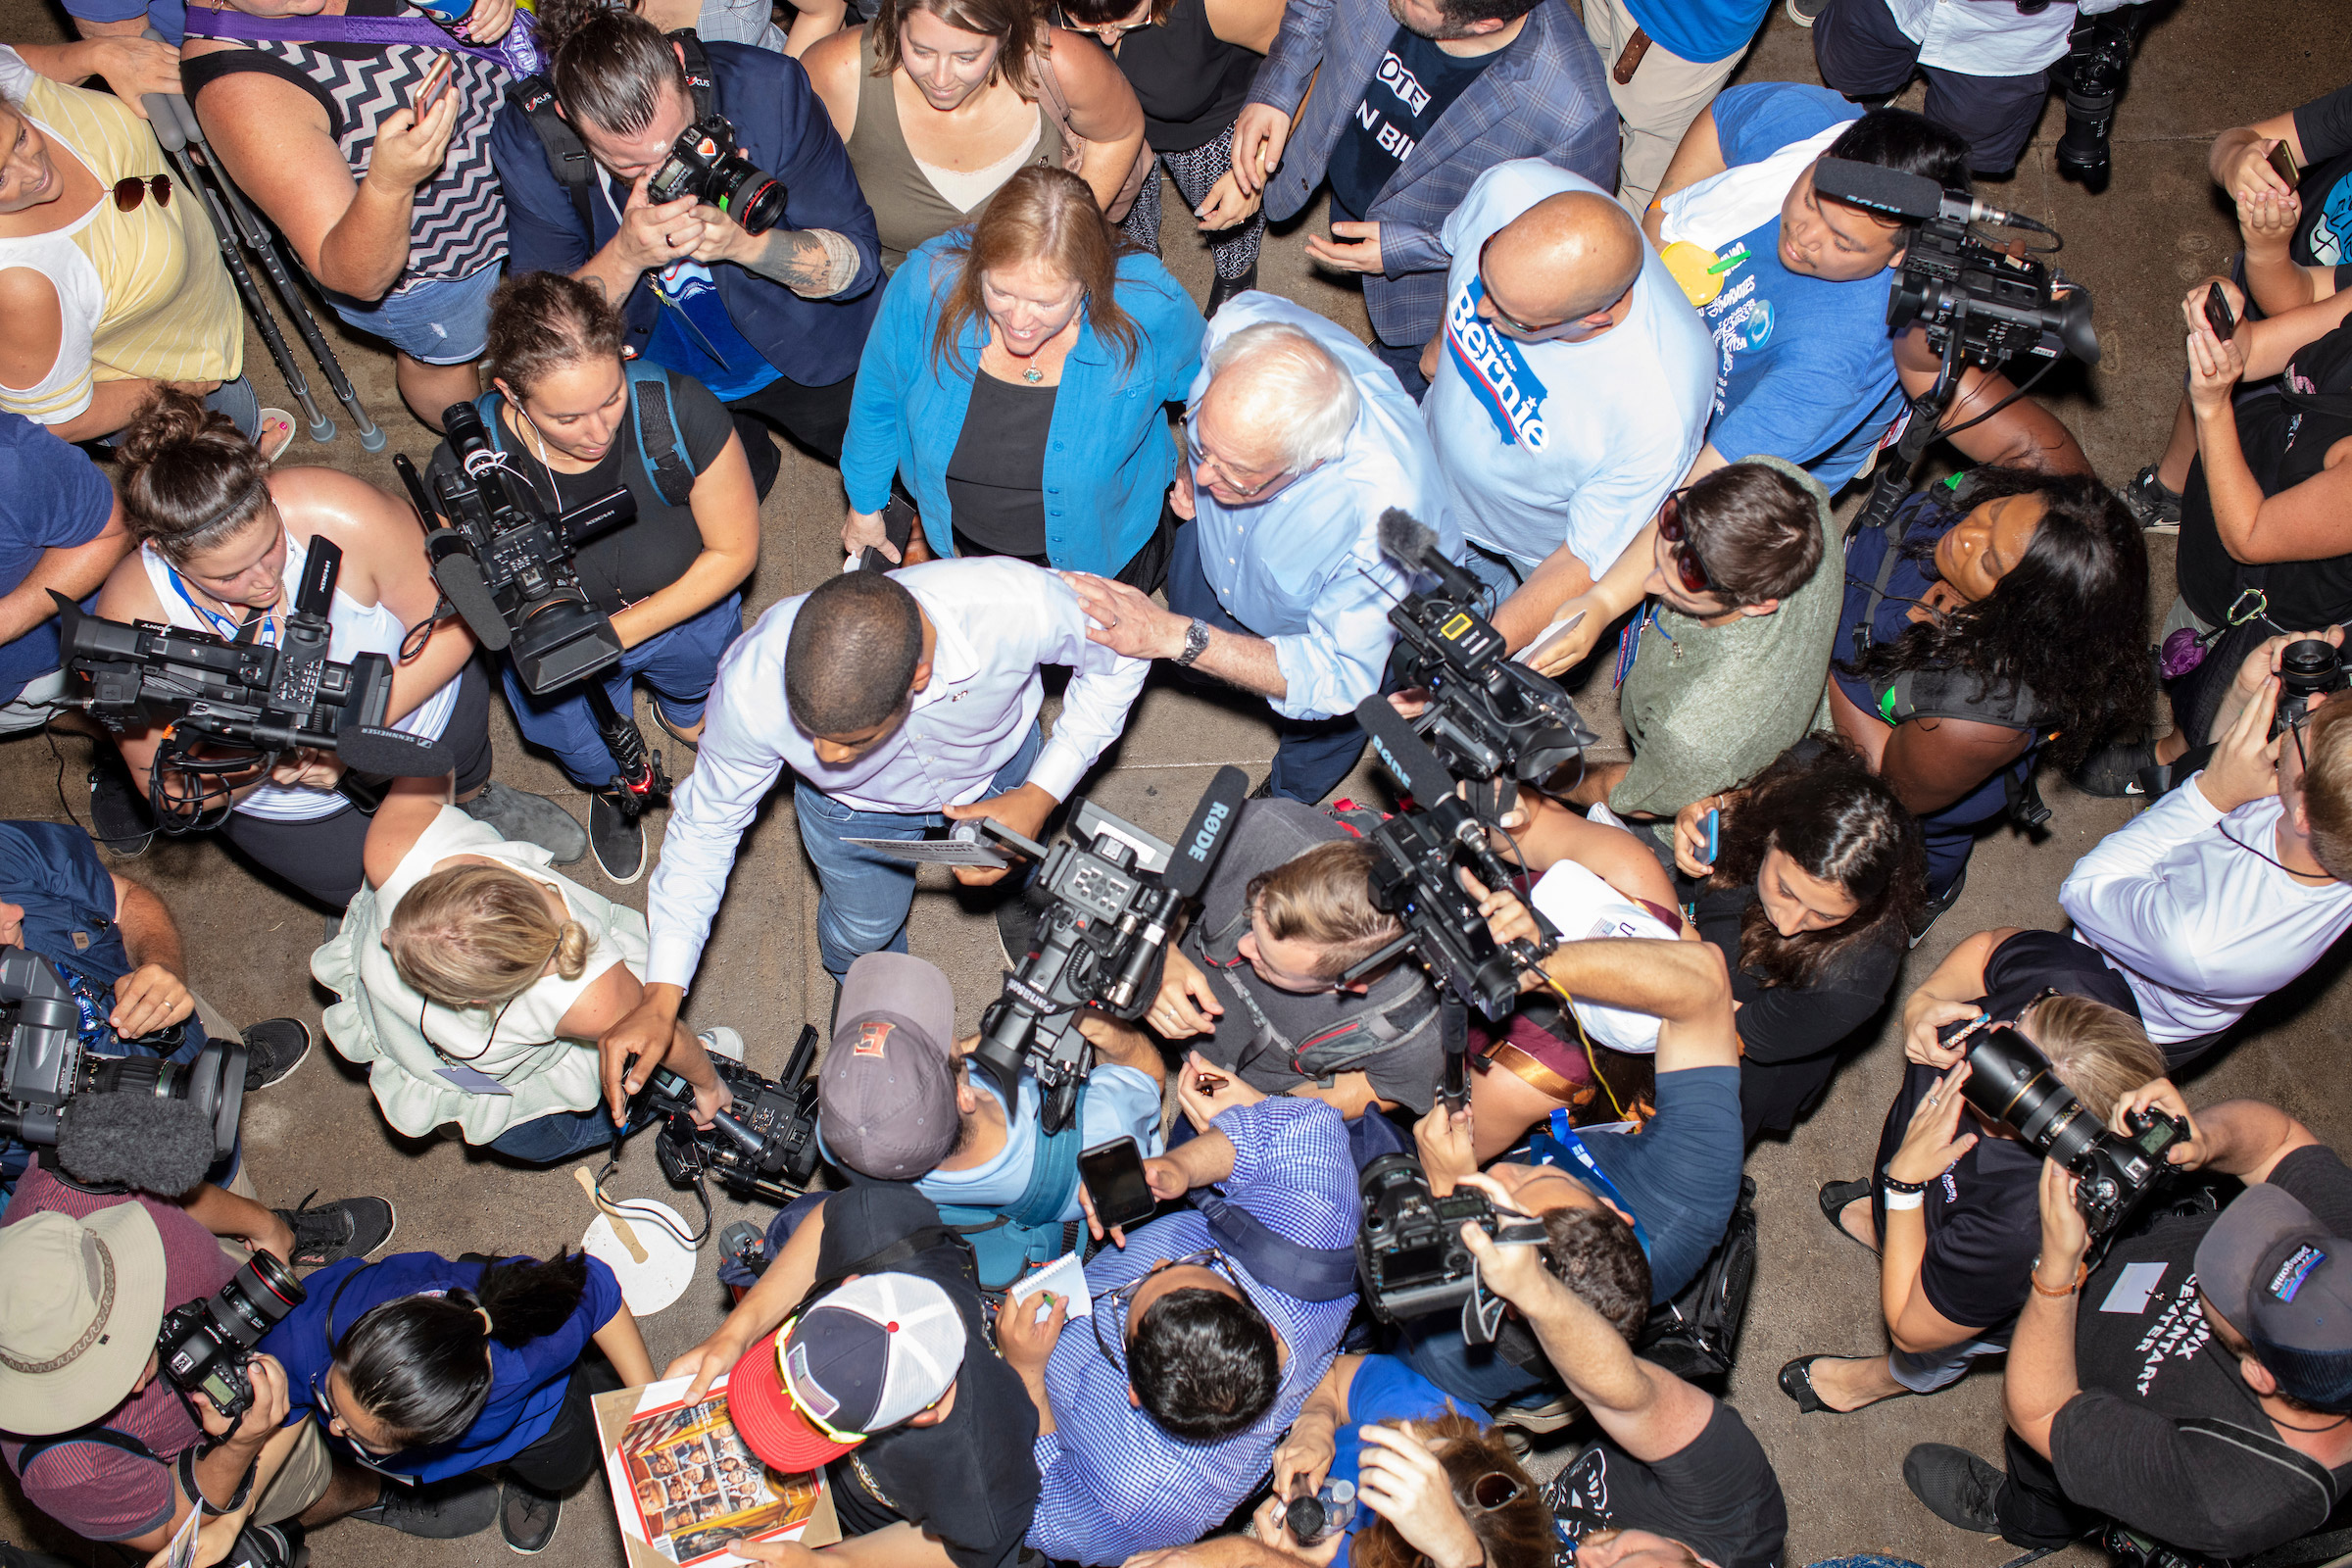 Democratic presidential candidate Bernie Sanders visits the sculpted Butter Cow in the Agriculture Building while surrounded by media and crowds on Aug. 11. (M. Scott Brauer for TIME)